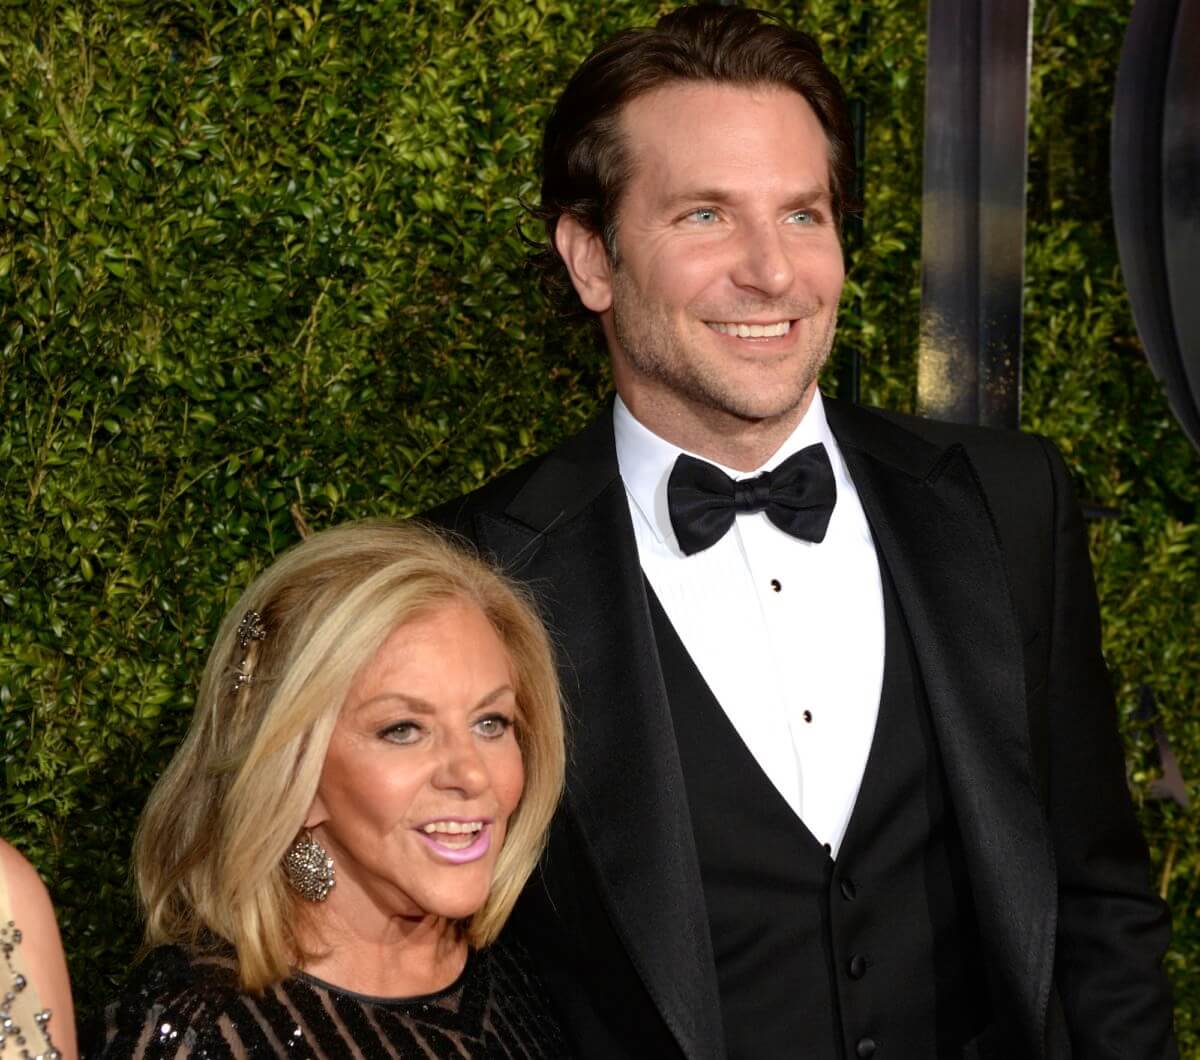 Bradley Cooper introduces new girlfriend to his mom